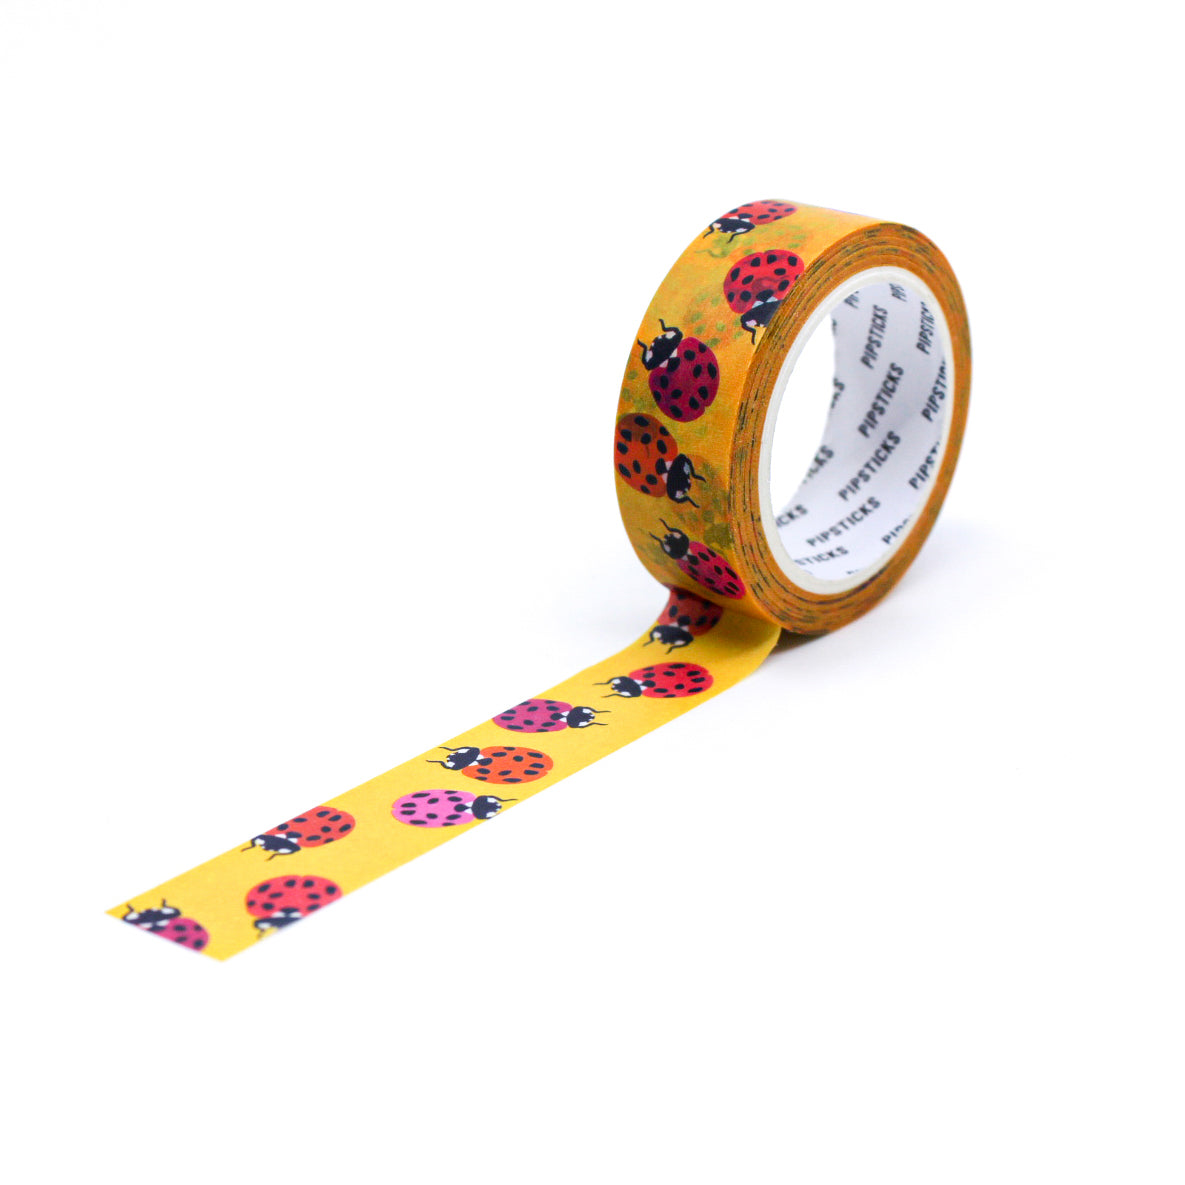 Adorable Lady Bugs Washi Tape: Features cute ladybugs, ideal for adding a playful and charming touch to your planners, journals, and crafts. This tape is from Pipsticks and sold at BBB Supplies Craft Shop.